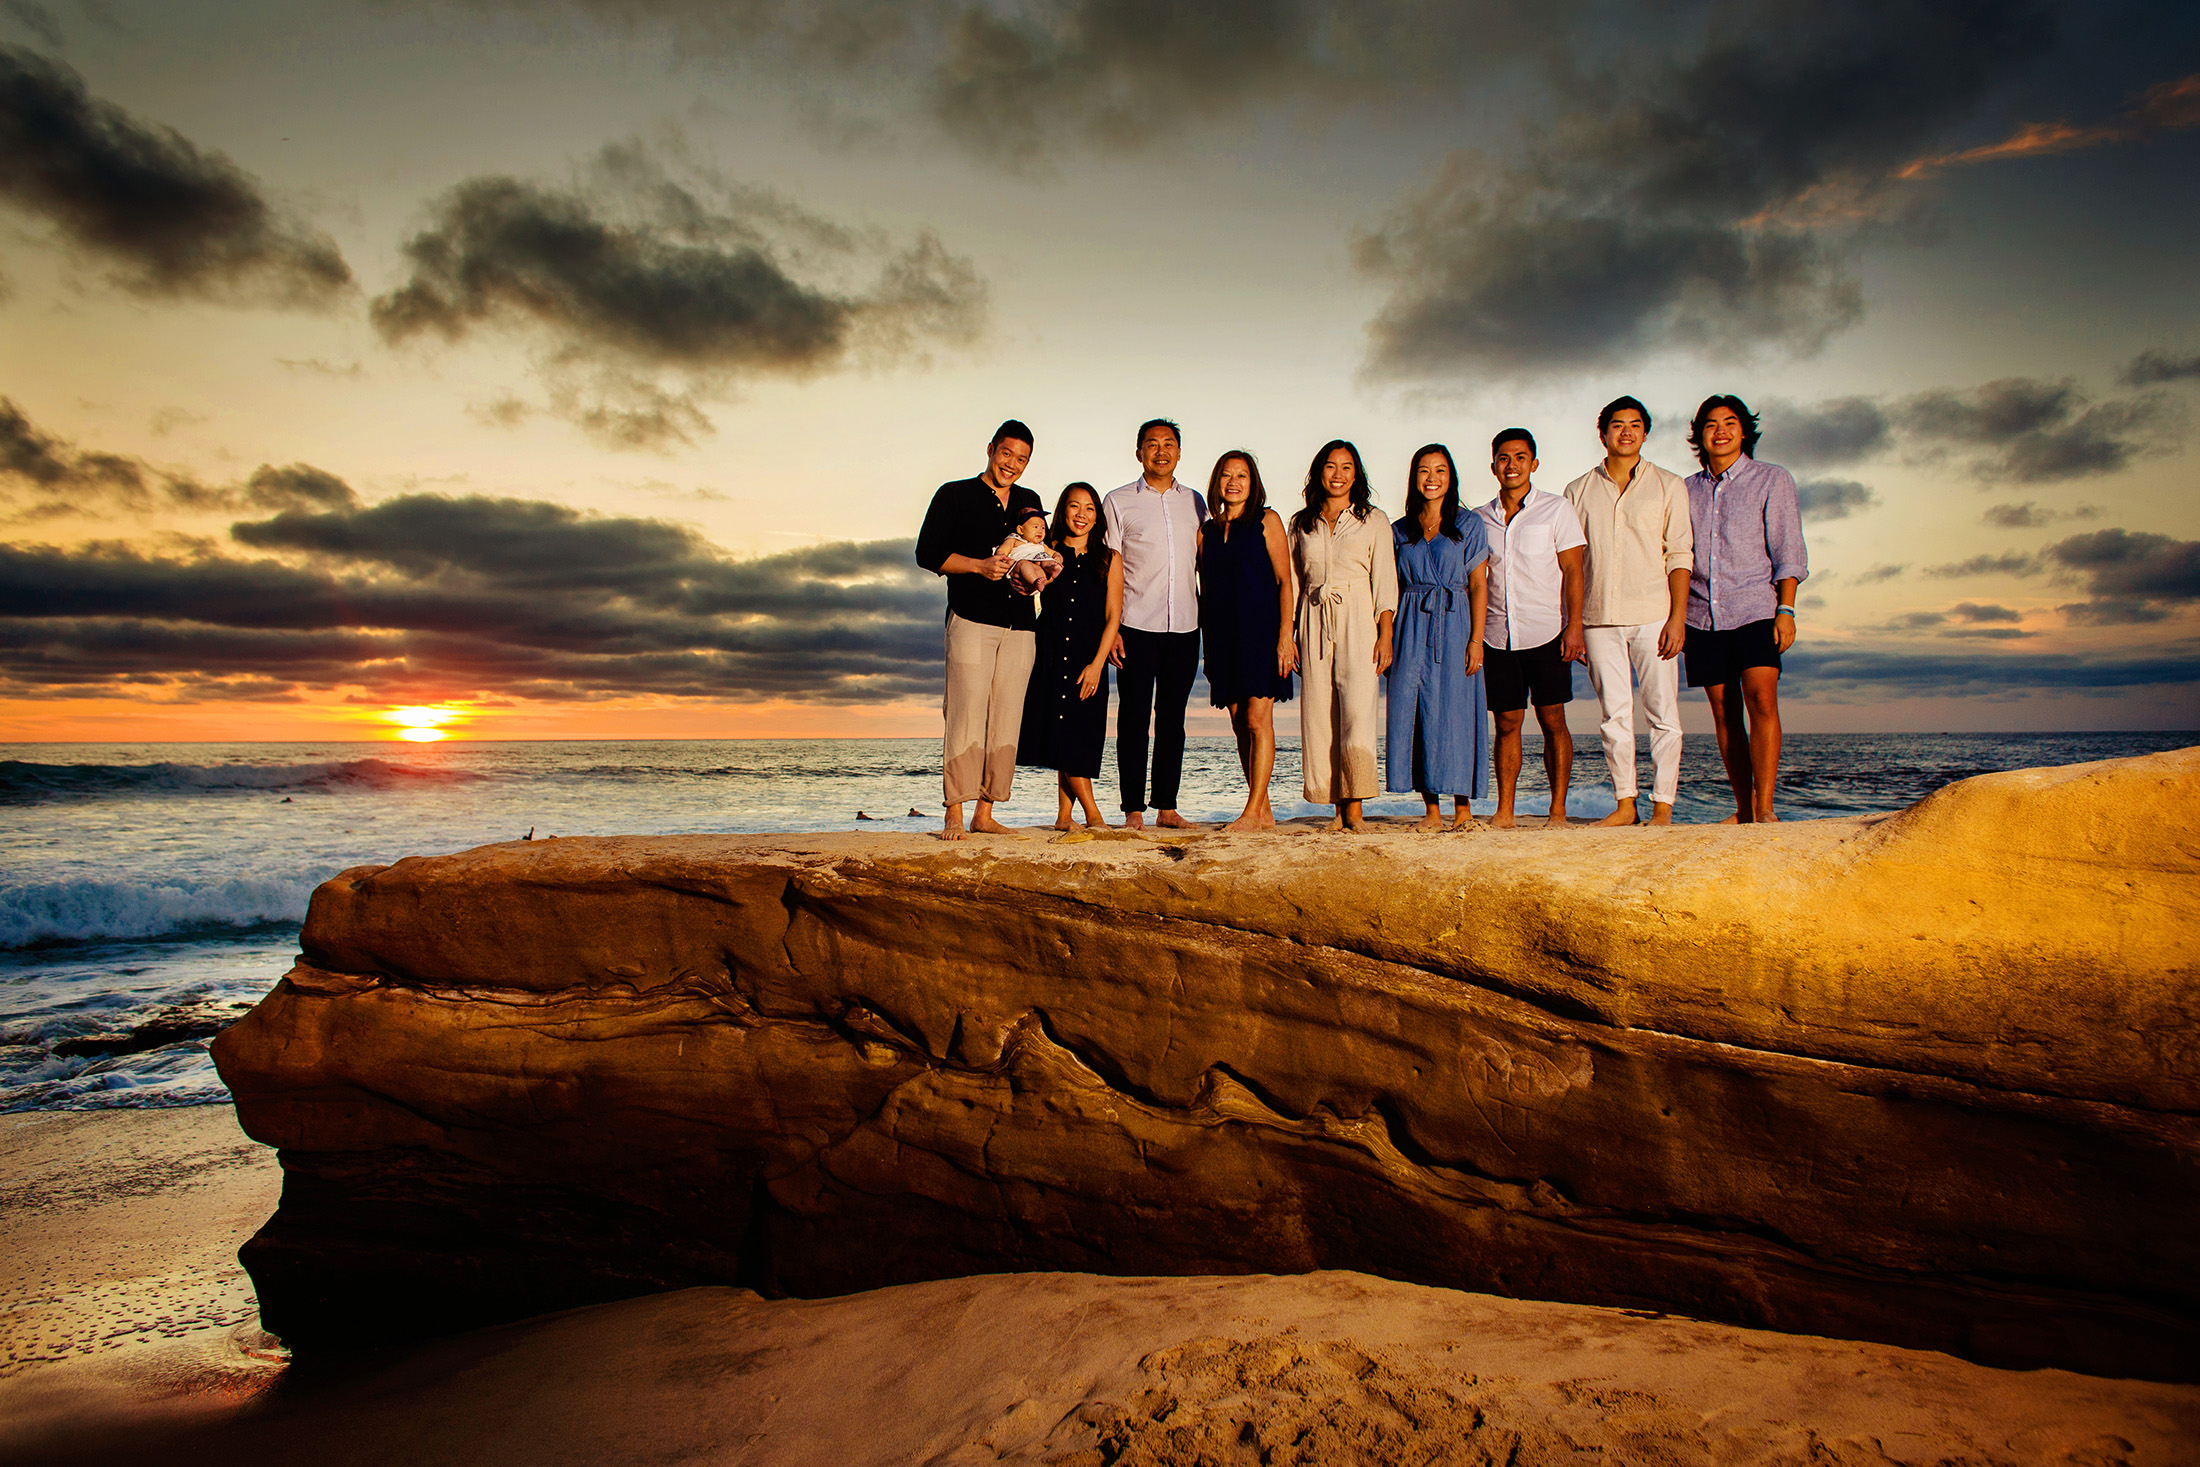 Love photographing familes at San Diego's favorite beach in La Jolla. Best place for sunsets on the rocky cliffs